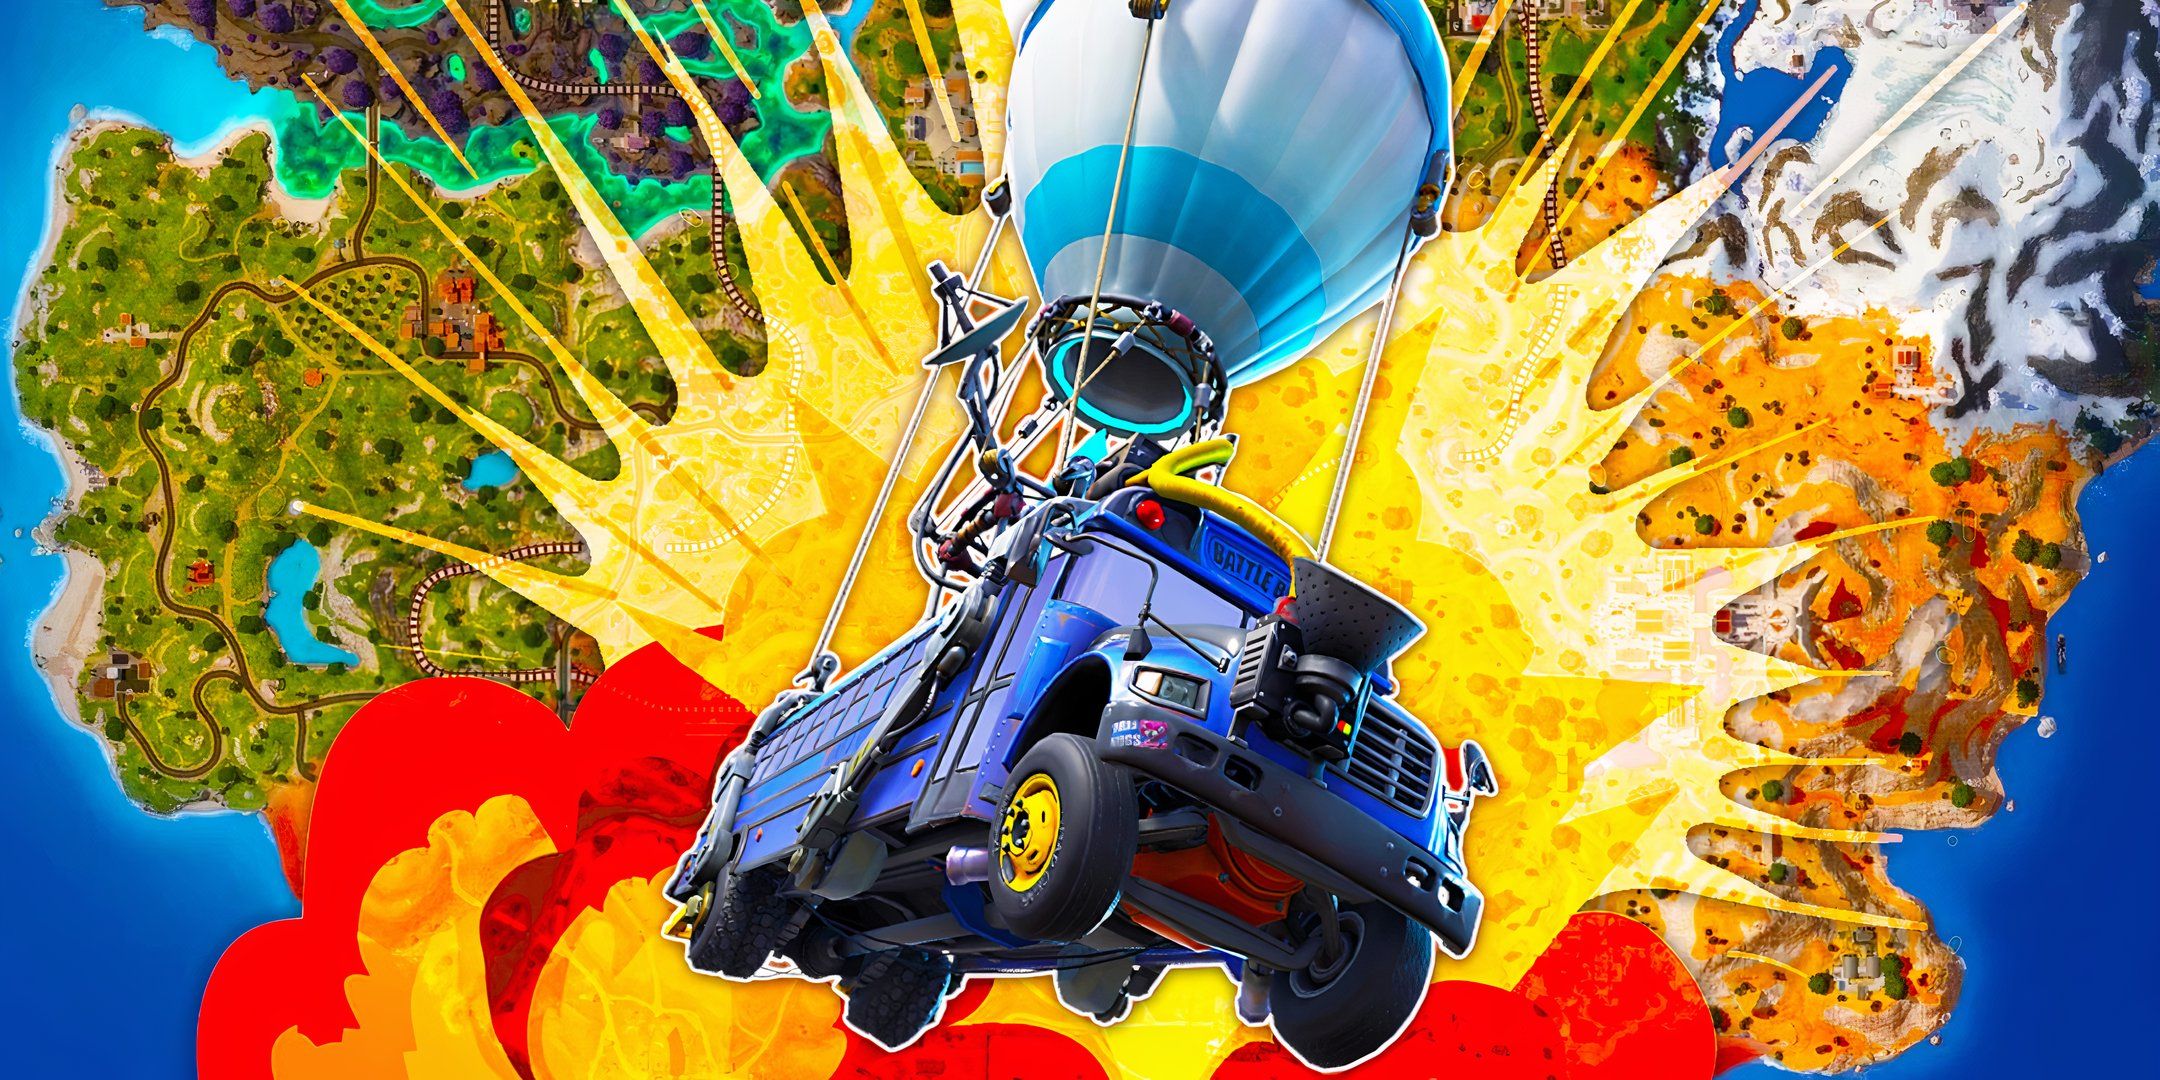 Fortnite's Battle Bus flies away from an explosion against the backdrop of the Fortnite island map